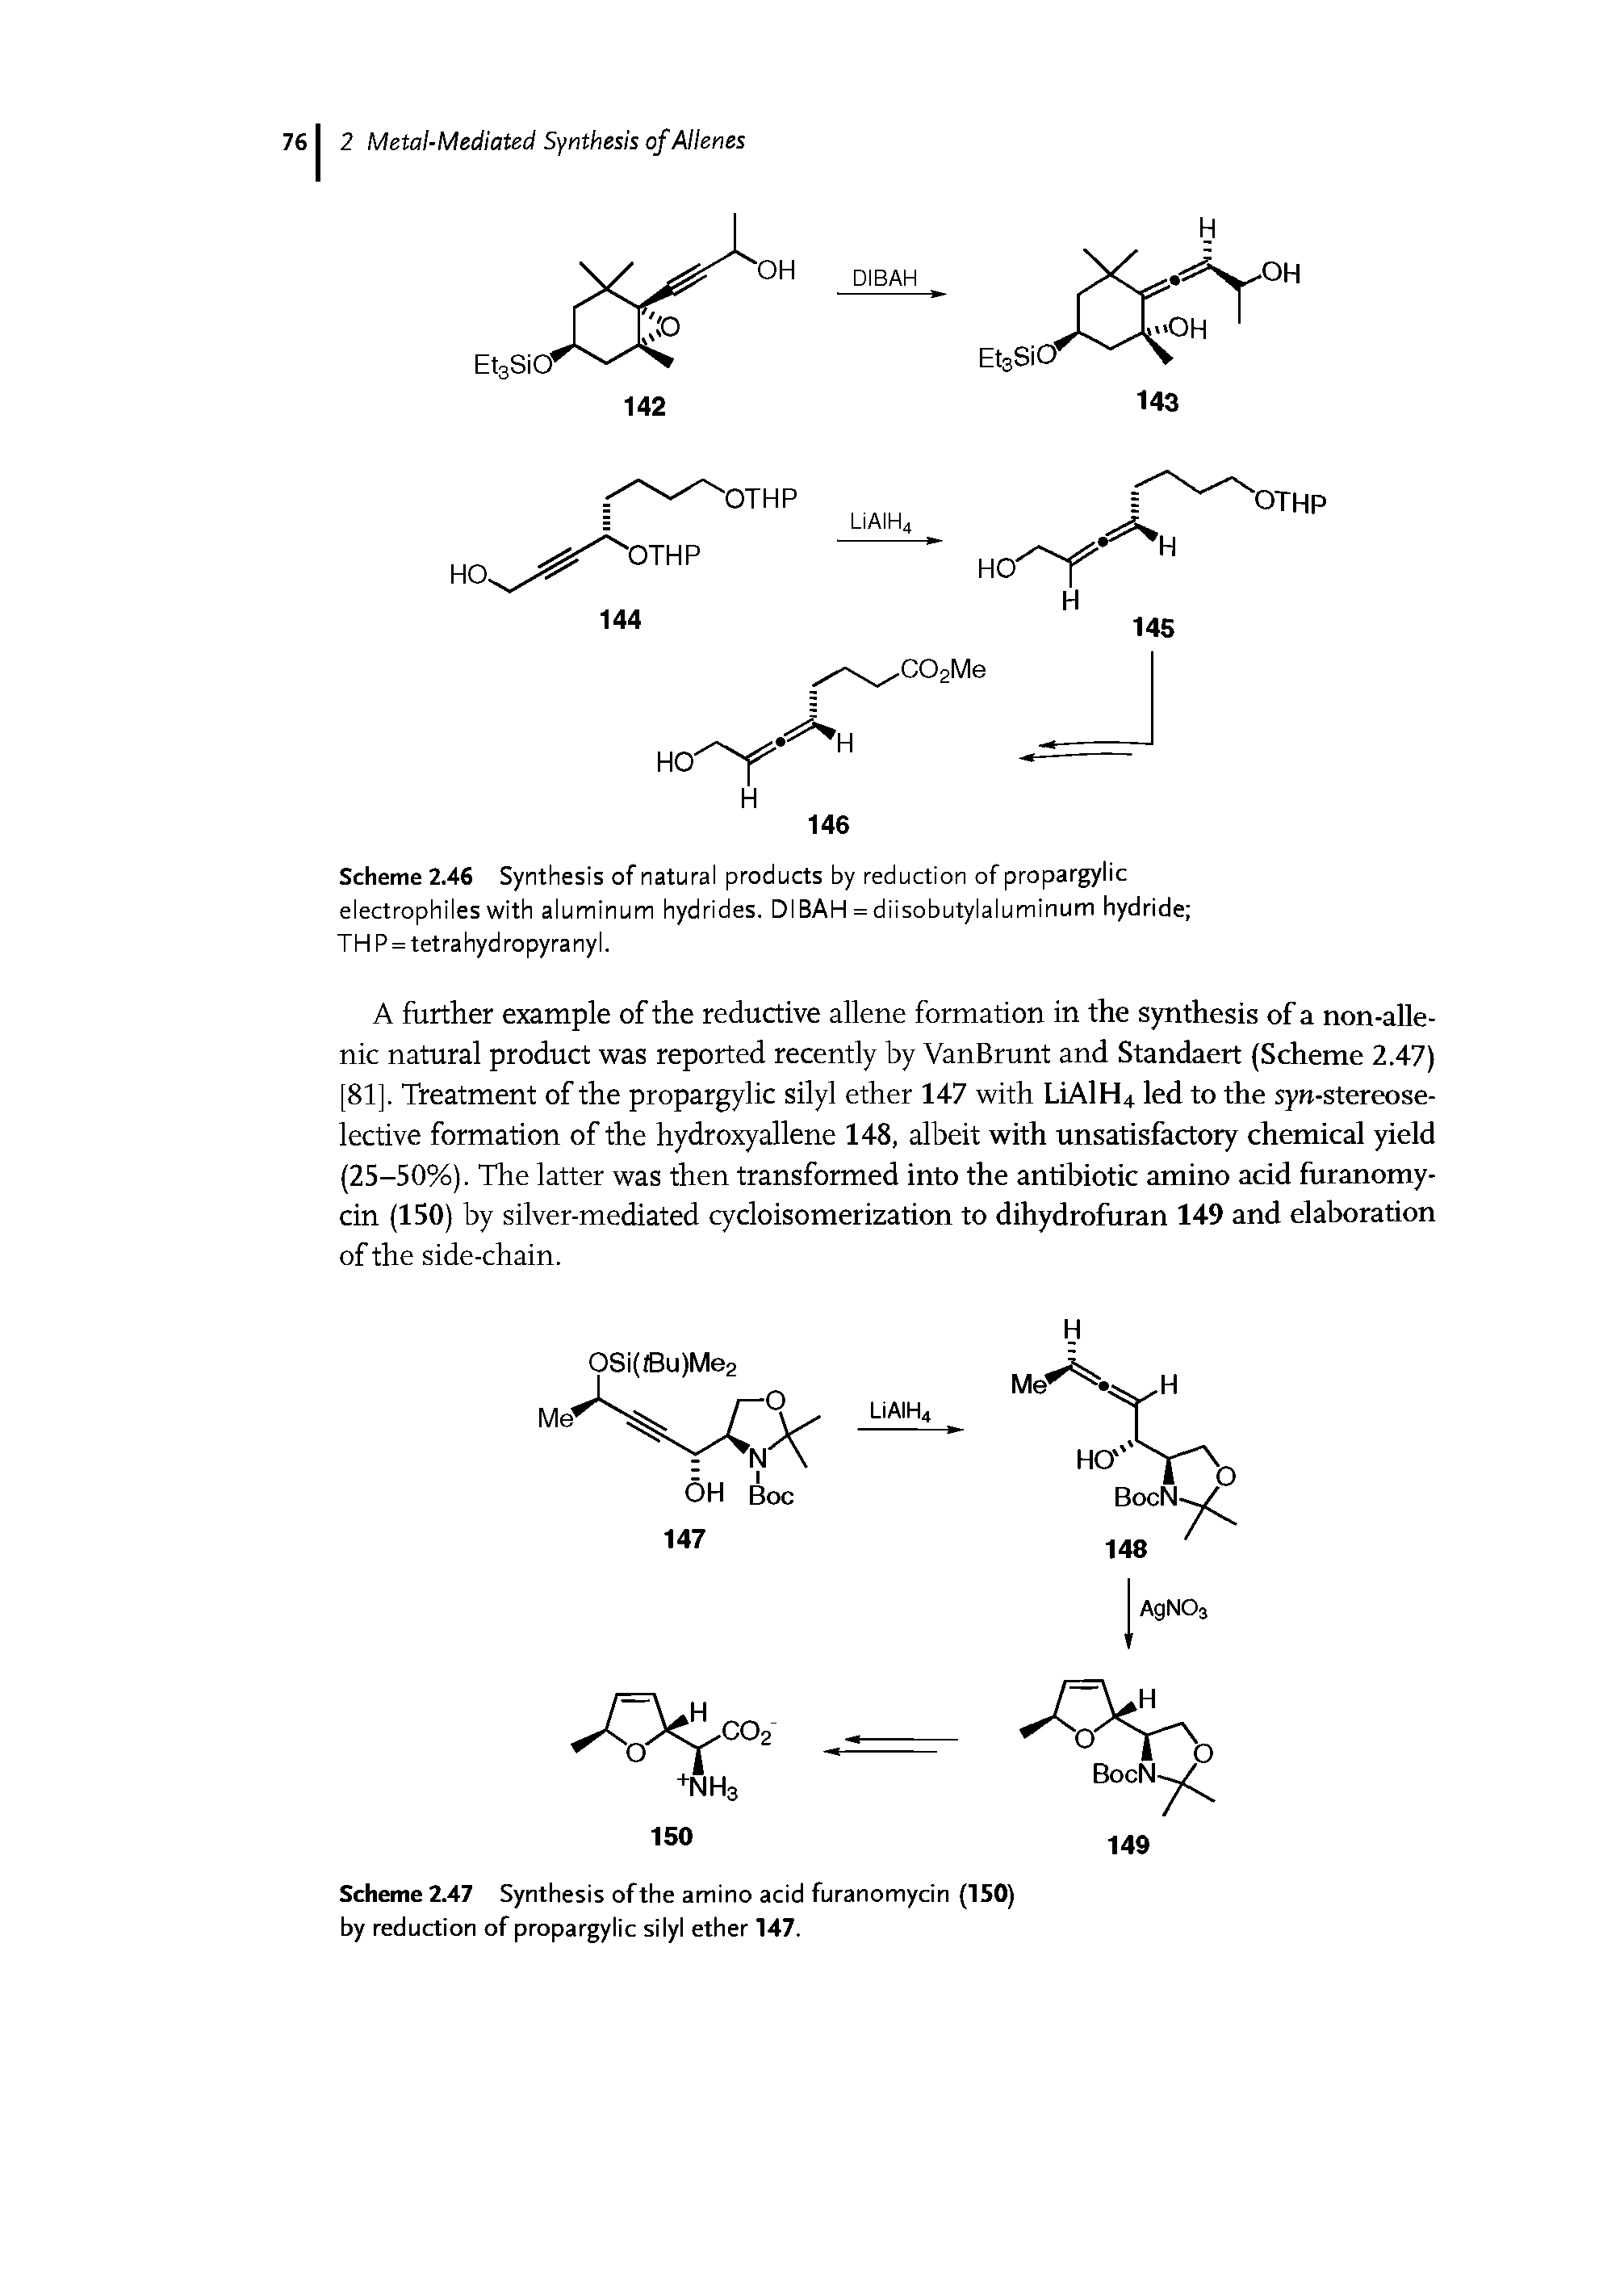 Scheme 2.46 Synthesis of natural products by reduction of propargylic electrophiles with aluminum hydrides. DIBAH = diisobutylaluminum hydride ...